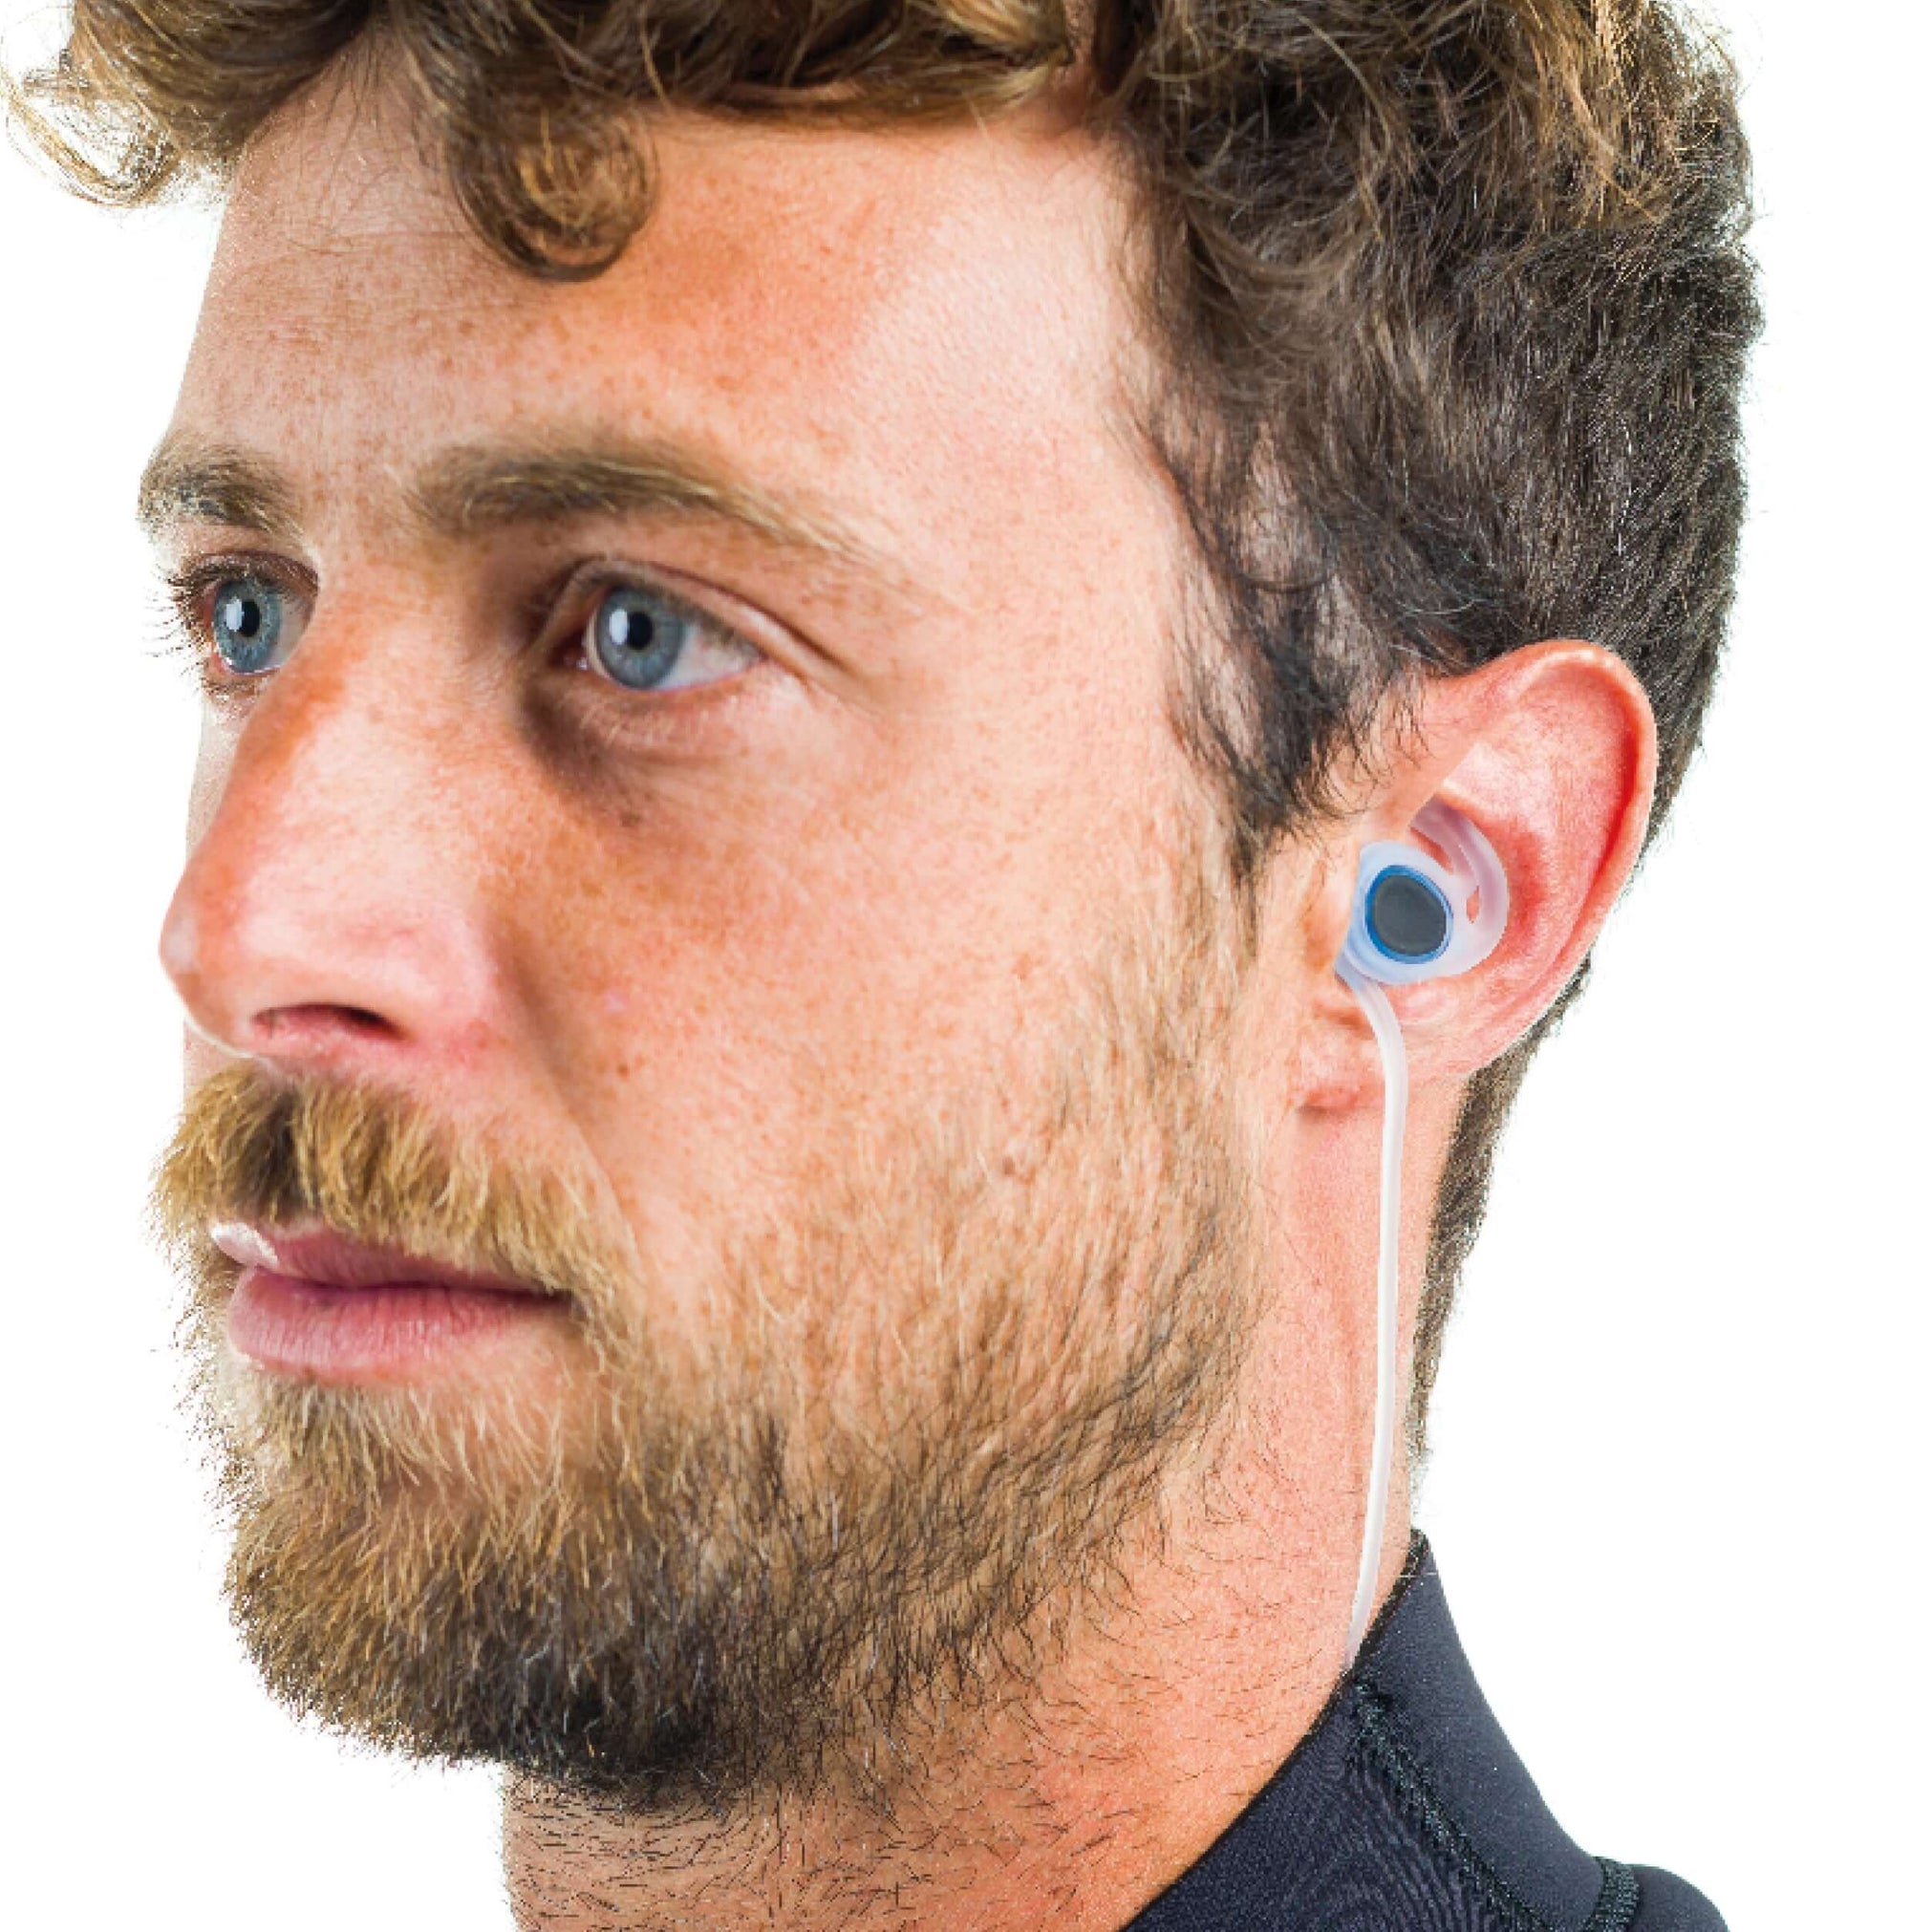 Man wearing protective ear plugs for water use